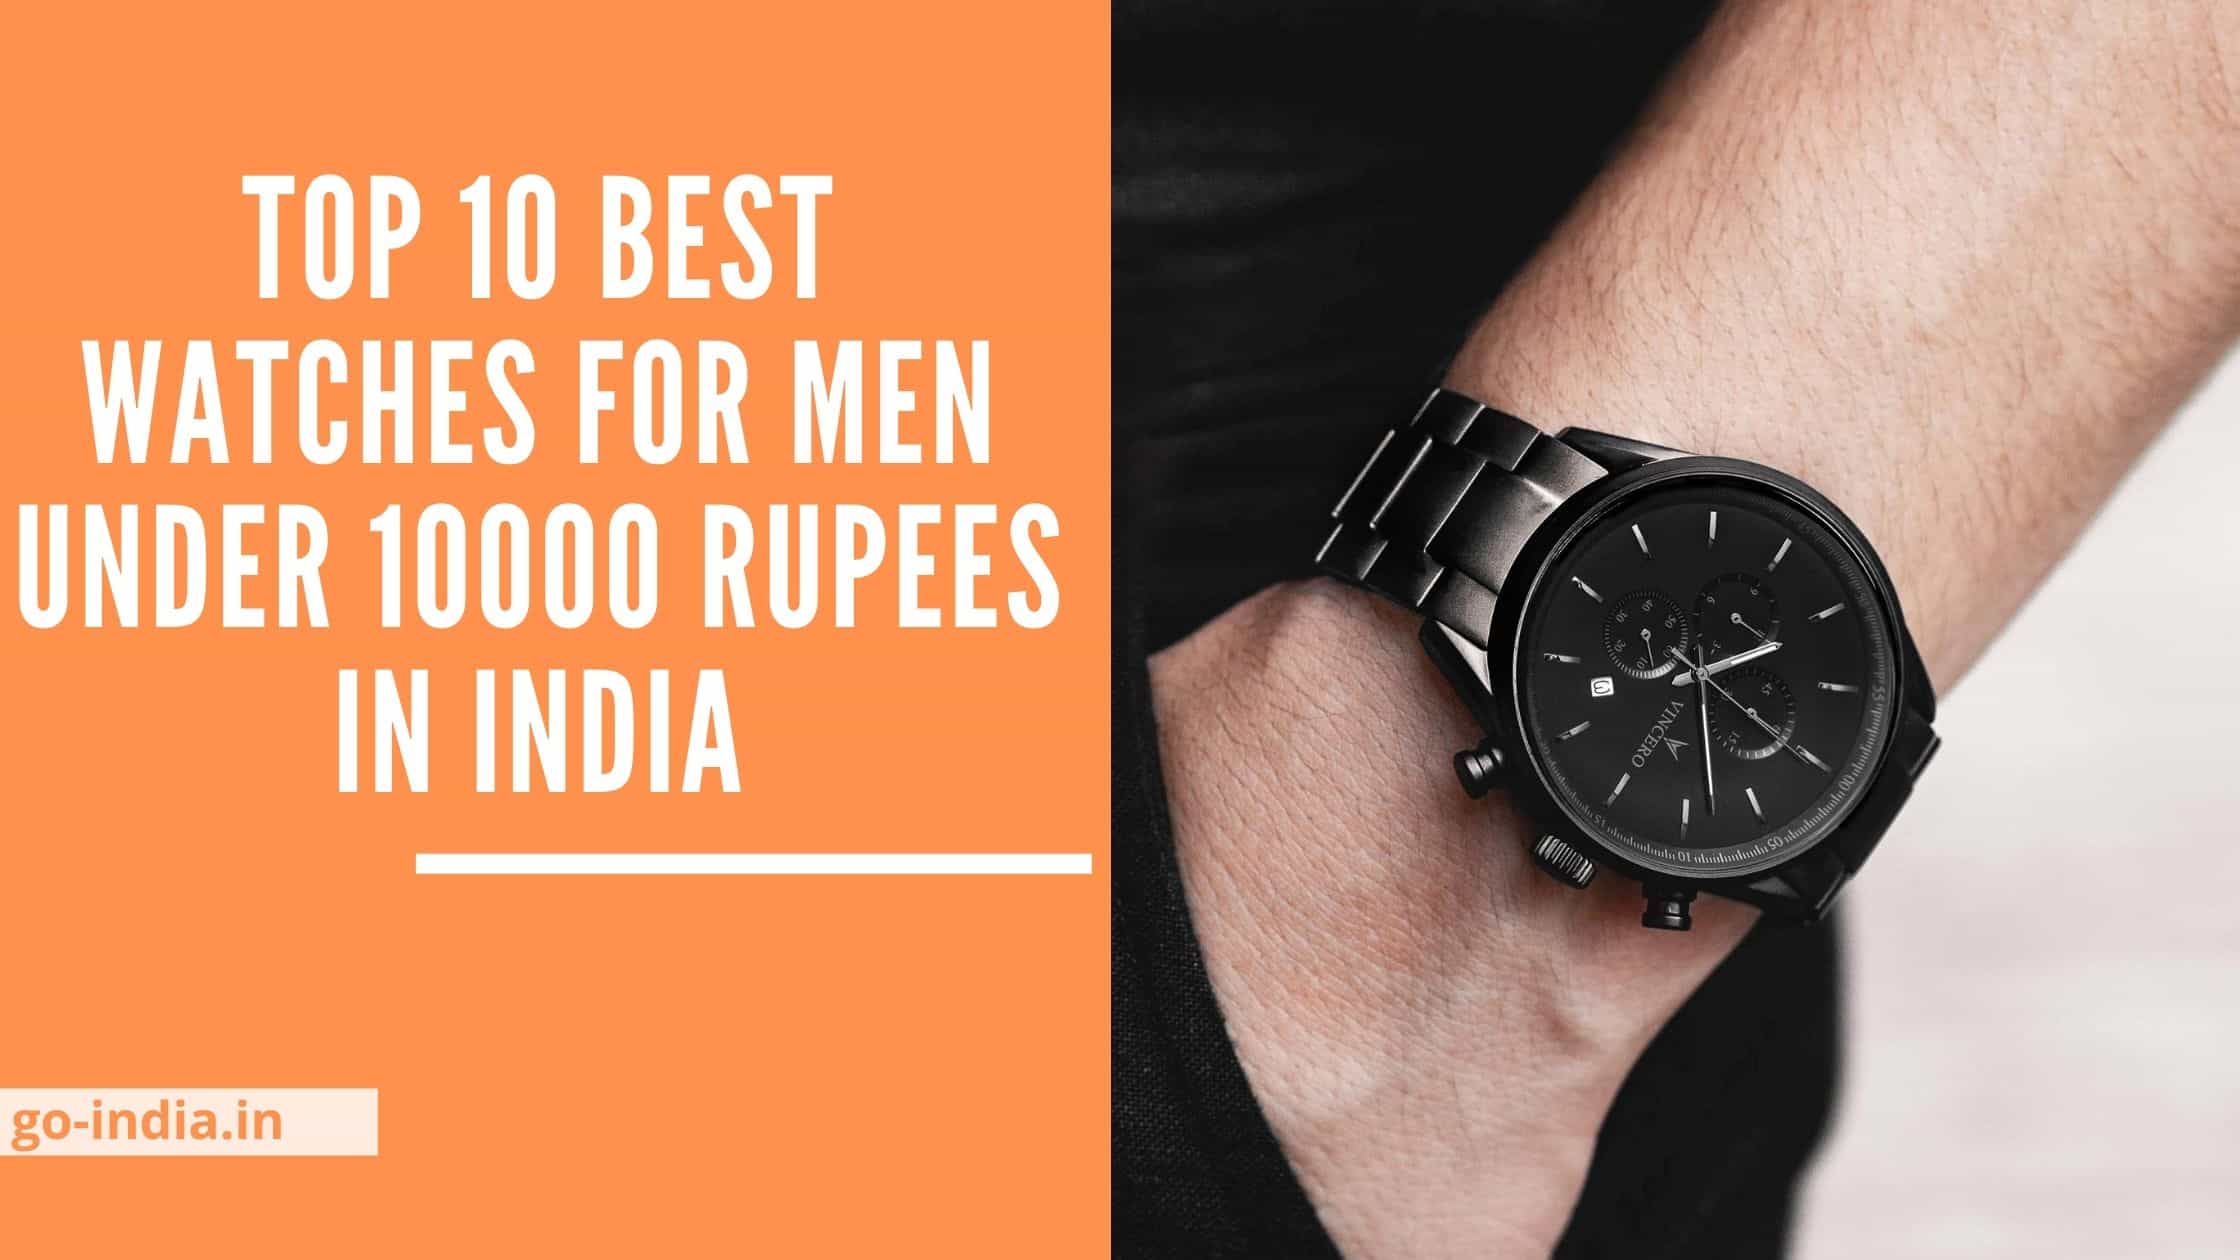 Top 10 Best Watches For Men Under 10000 Rupees in India 2022